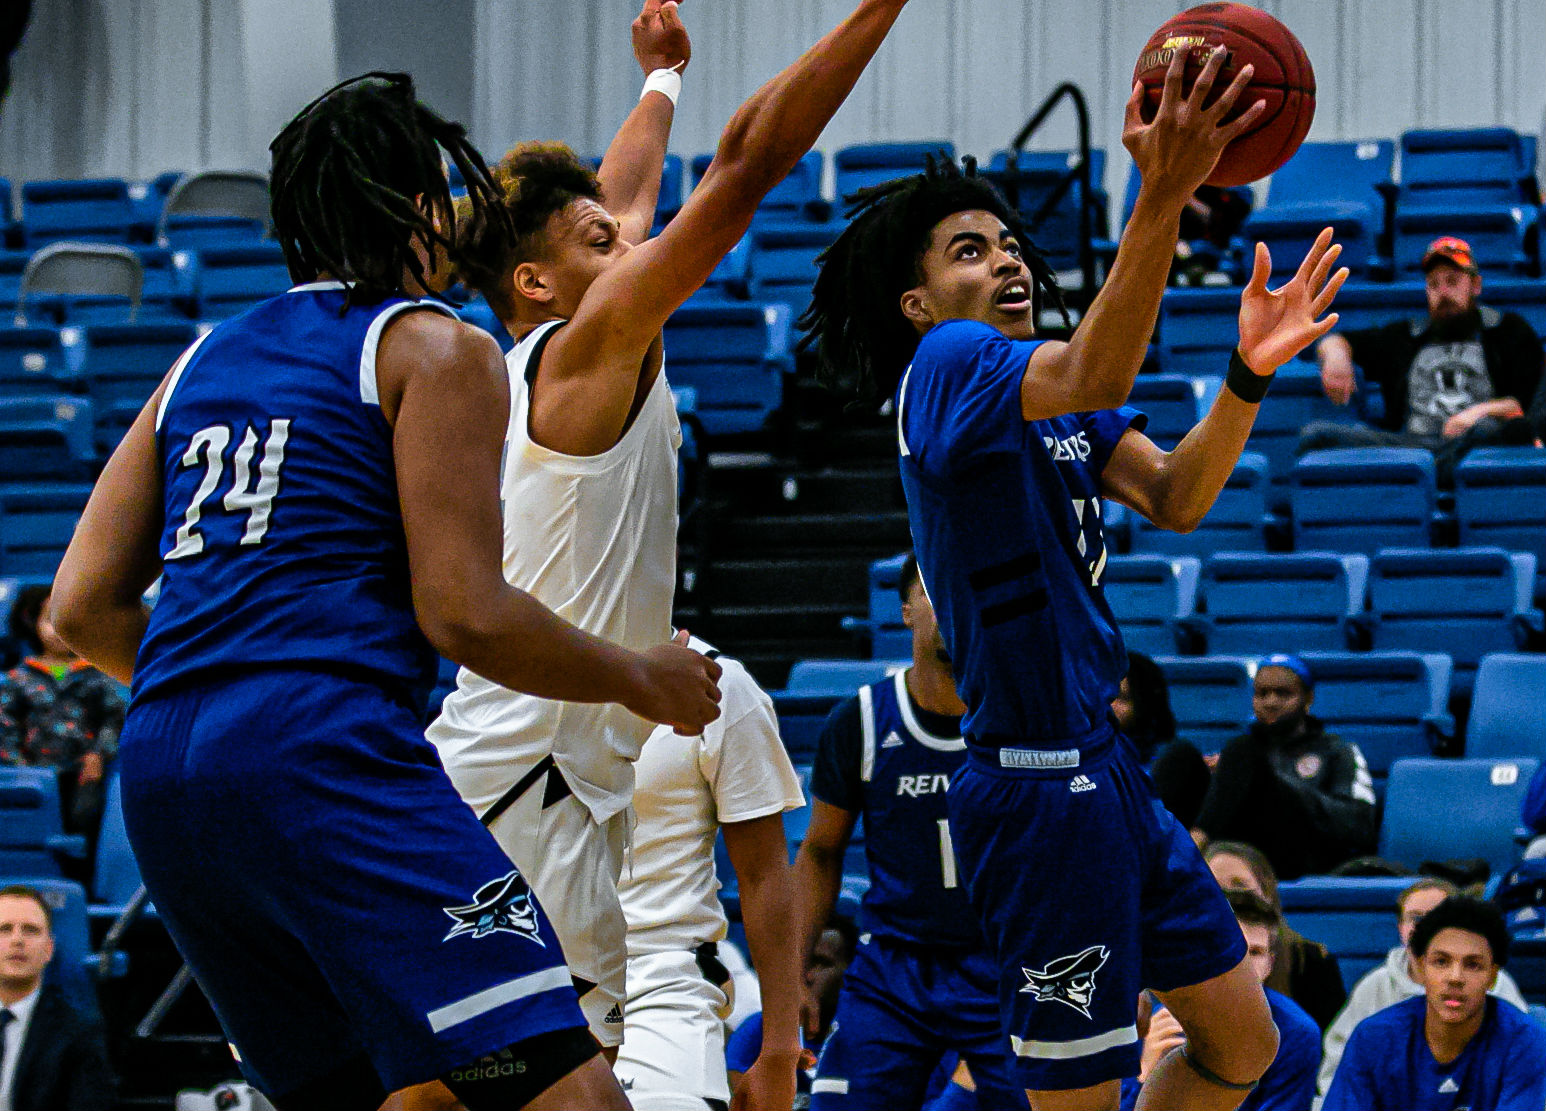 Jalen Dalcourt and his Reiver teammates could not recapture the energy spent in their conference win over #16 Southeastern earlier in the week, and dropped their road contest Saturday (1/25) afternoon.